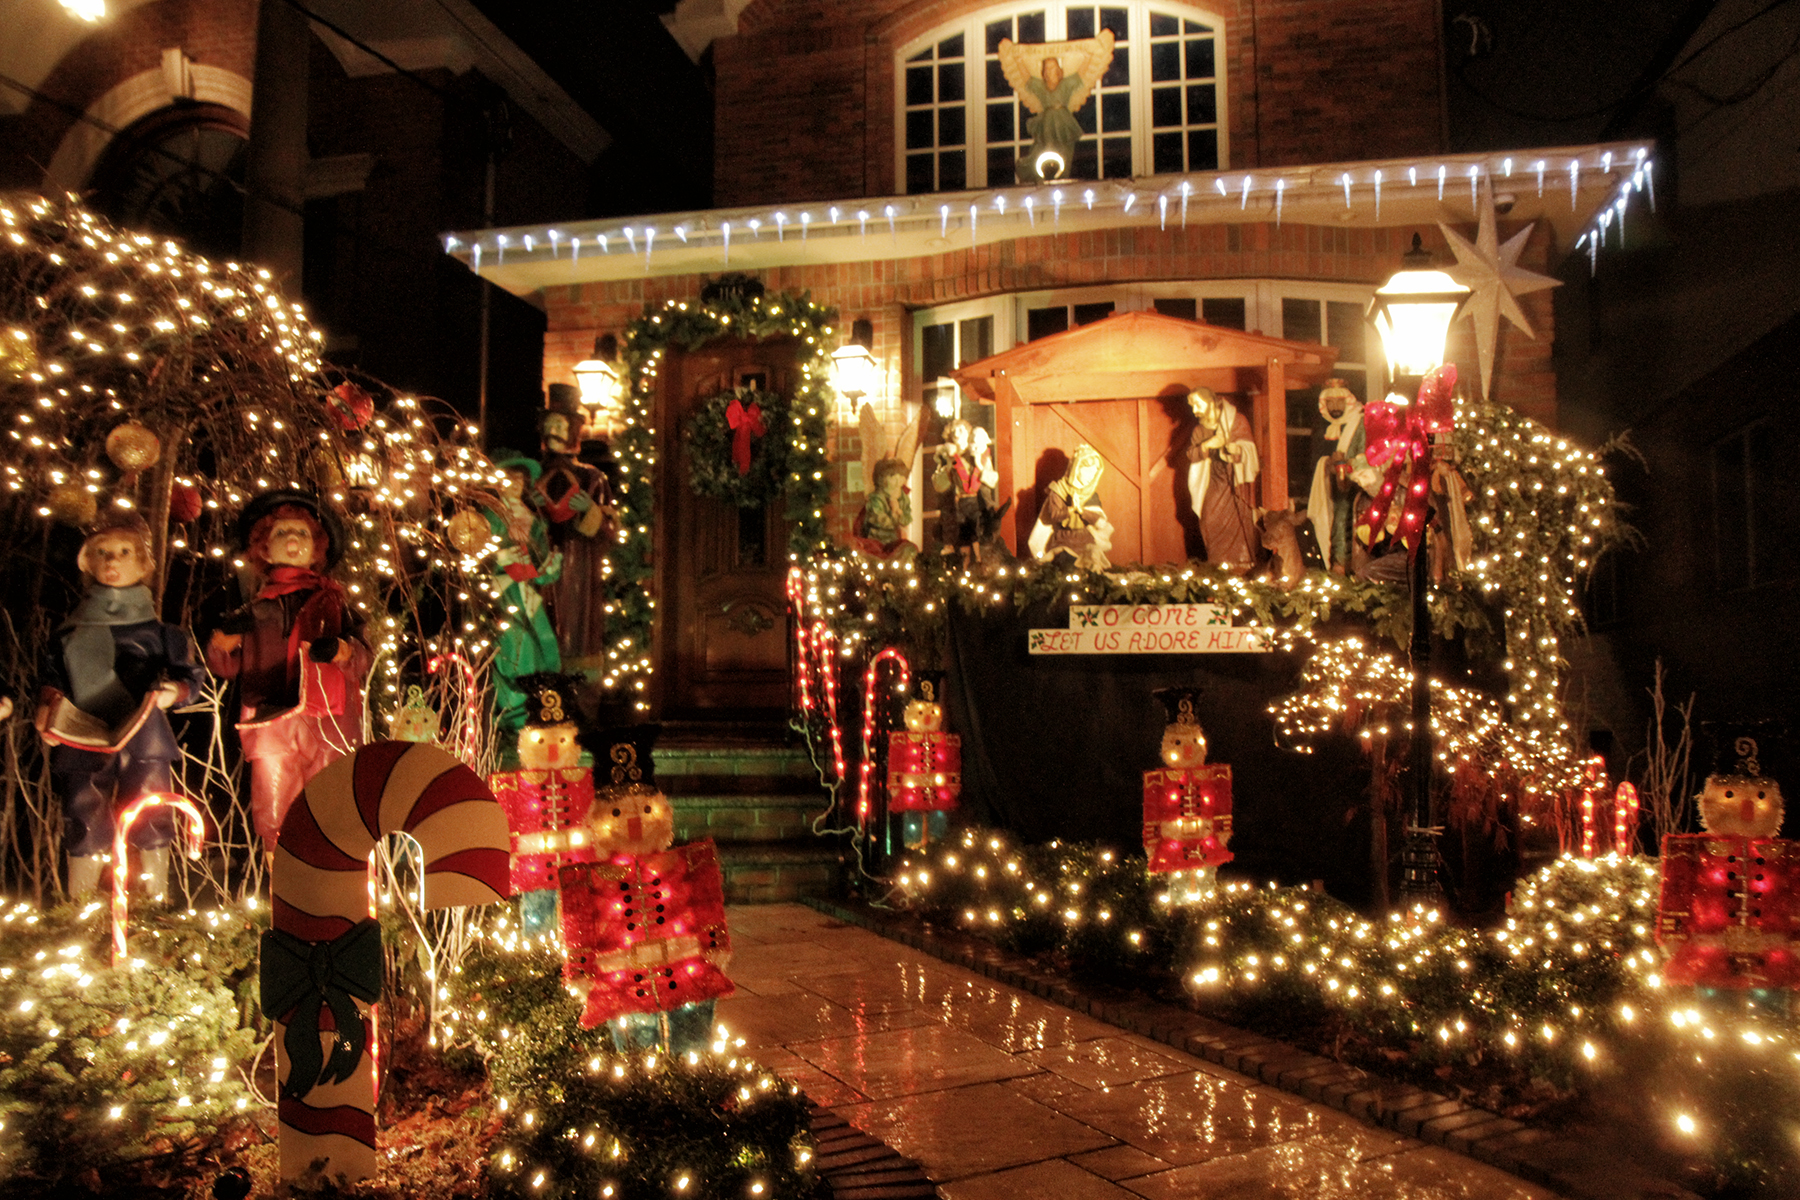 Dyker Heights celebrates the holiday spirit once again with lights ...